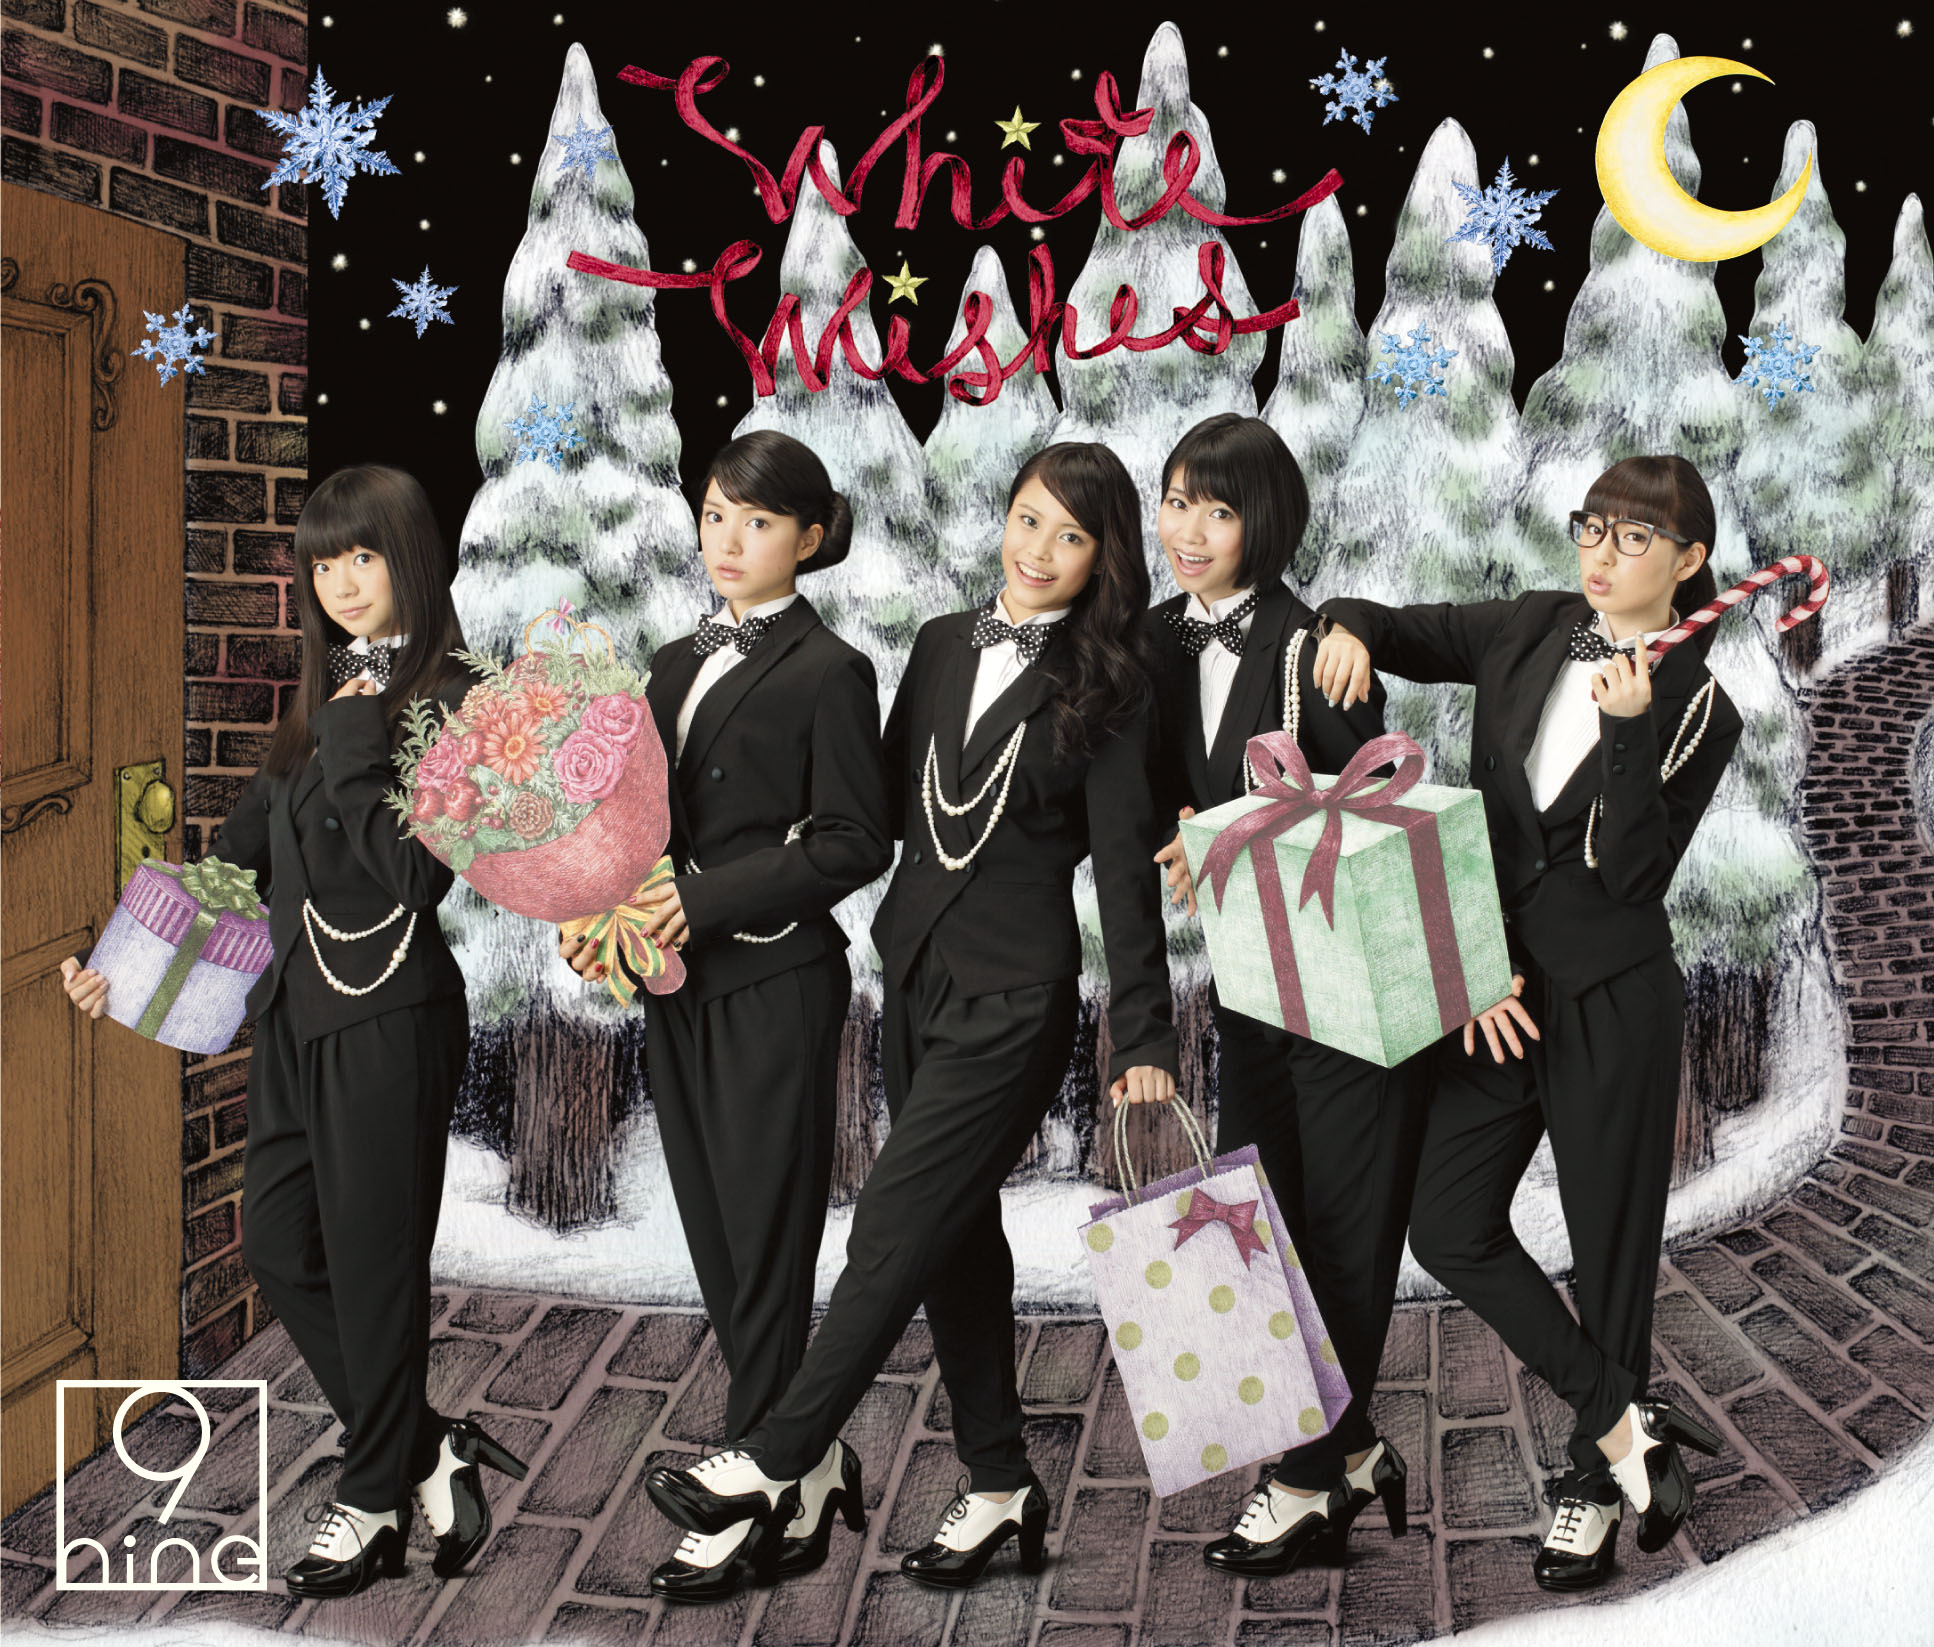 9nine’s member are in menswear on jacket covers for new single “White Wishes”